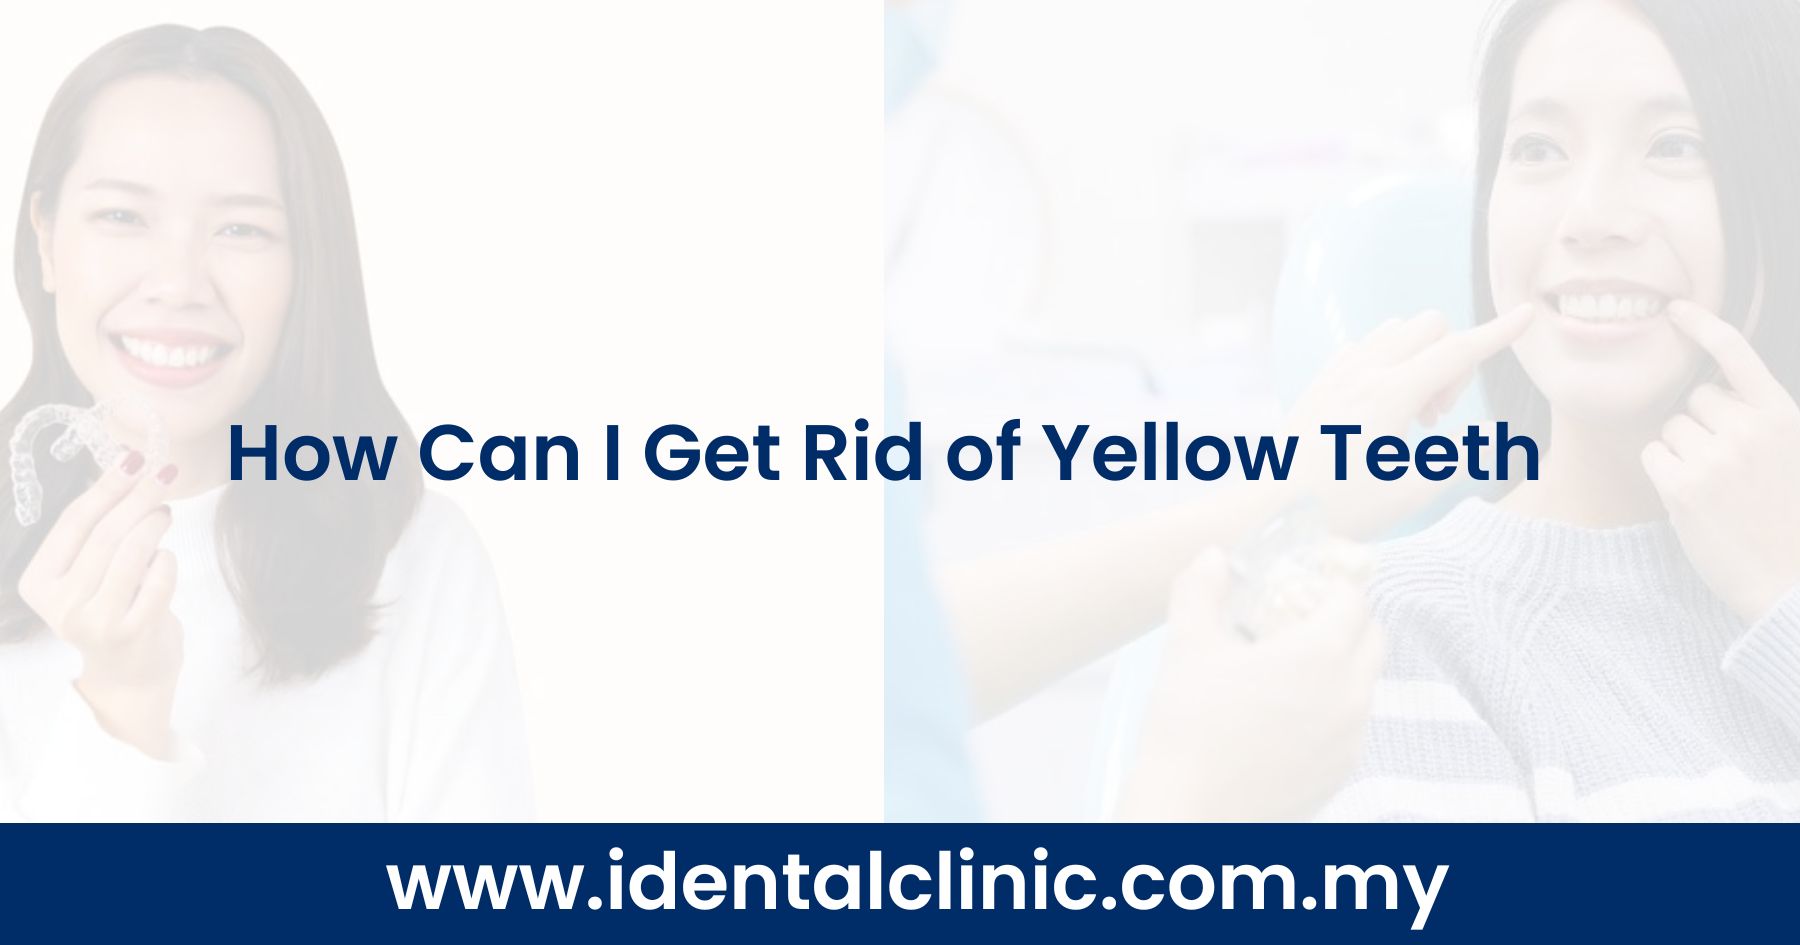 How Can I Get Rid of Yellow Teeth